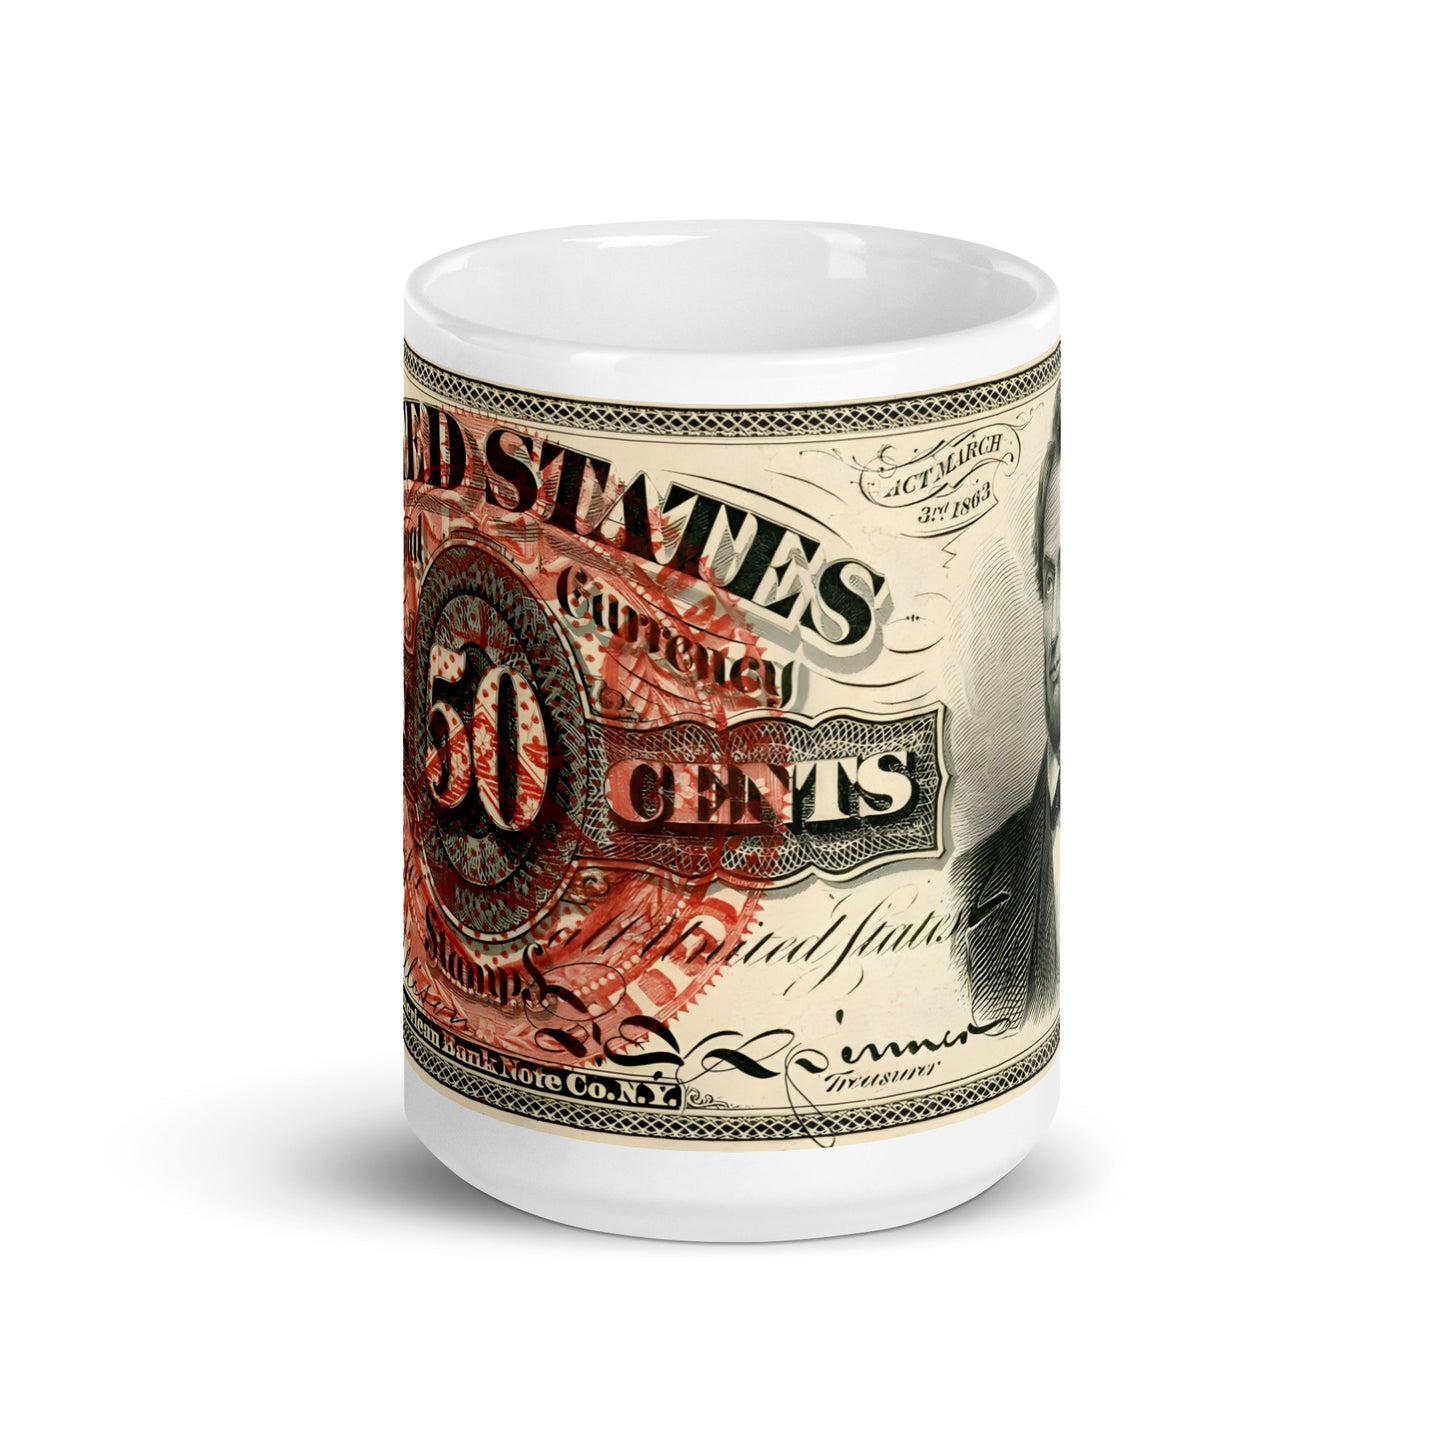 50 Cents 4TH Issue Fractional Currency (Abraham Lincoln) Edition - Classic Currency Collector's Mug